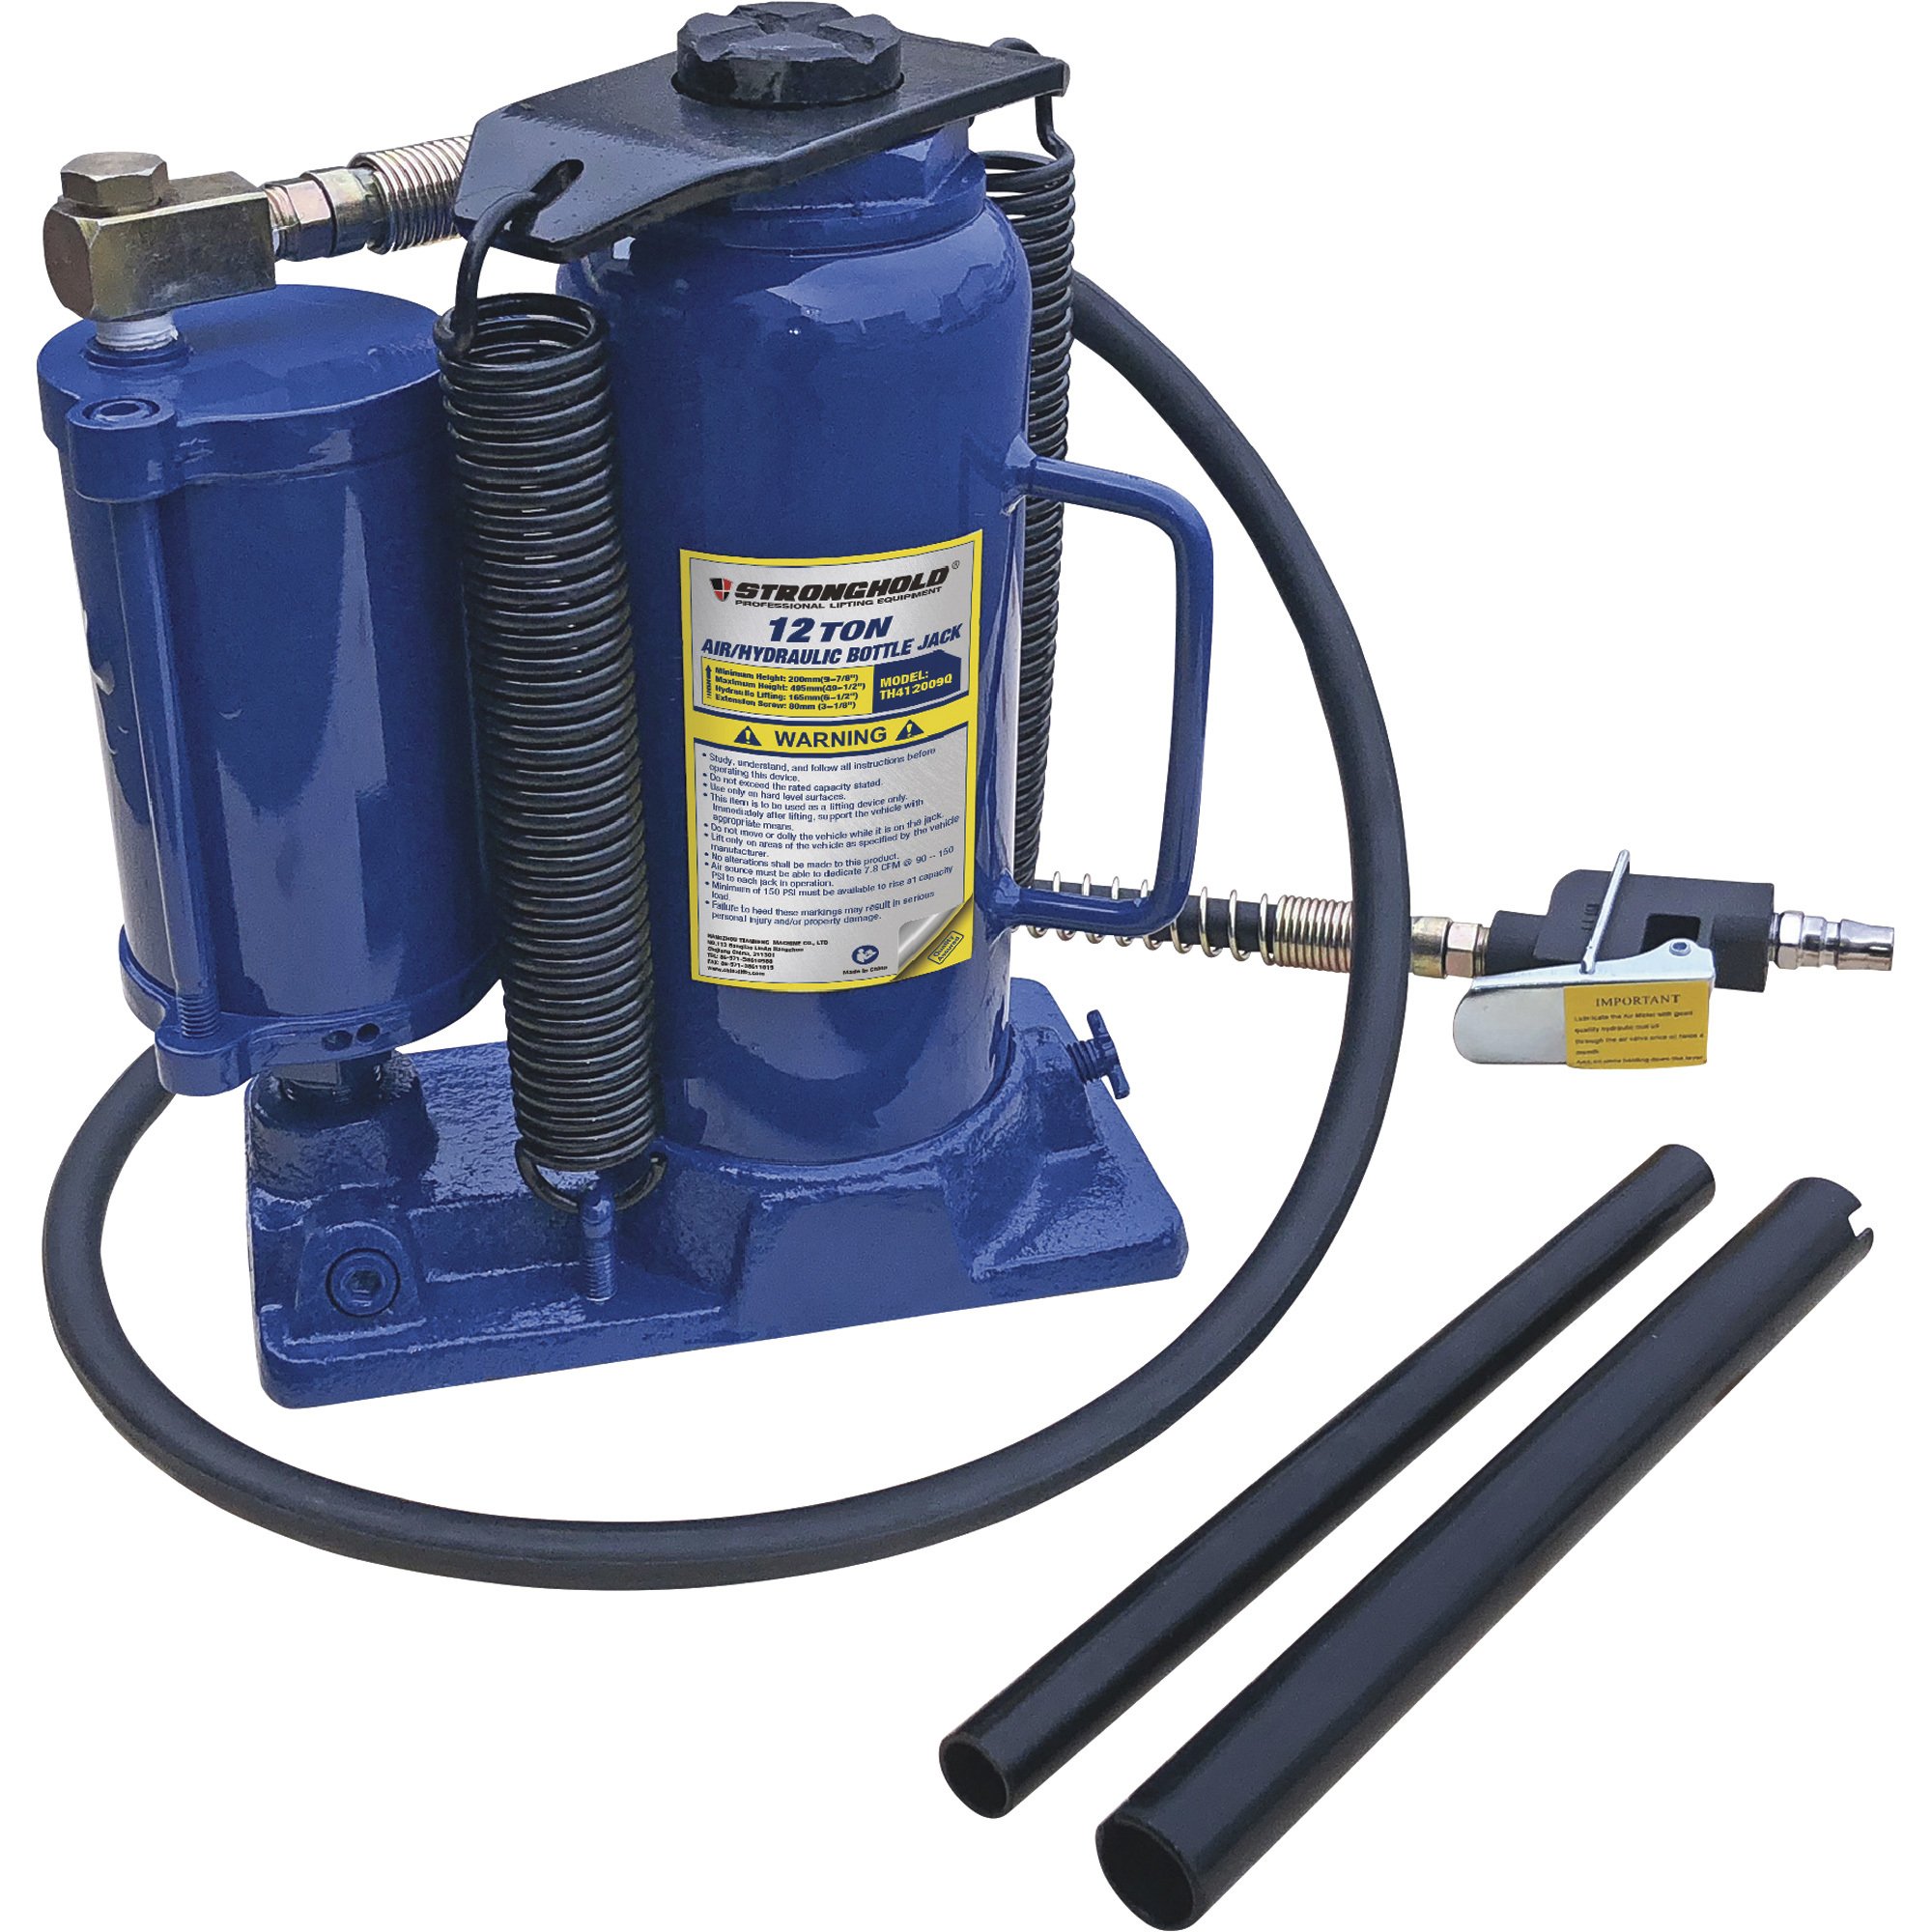 Stronghold 12-Ton Air/Hydraulic Bottle Jack — Model# 61122 Northern Tool